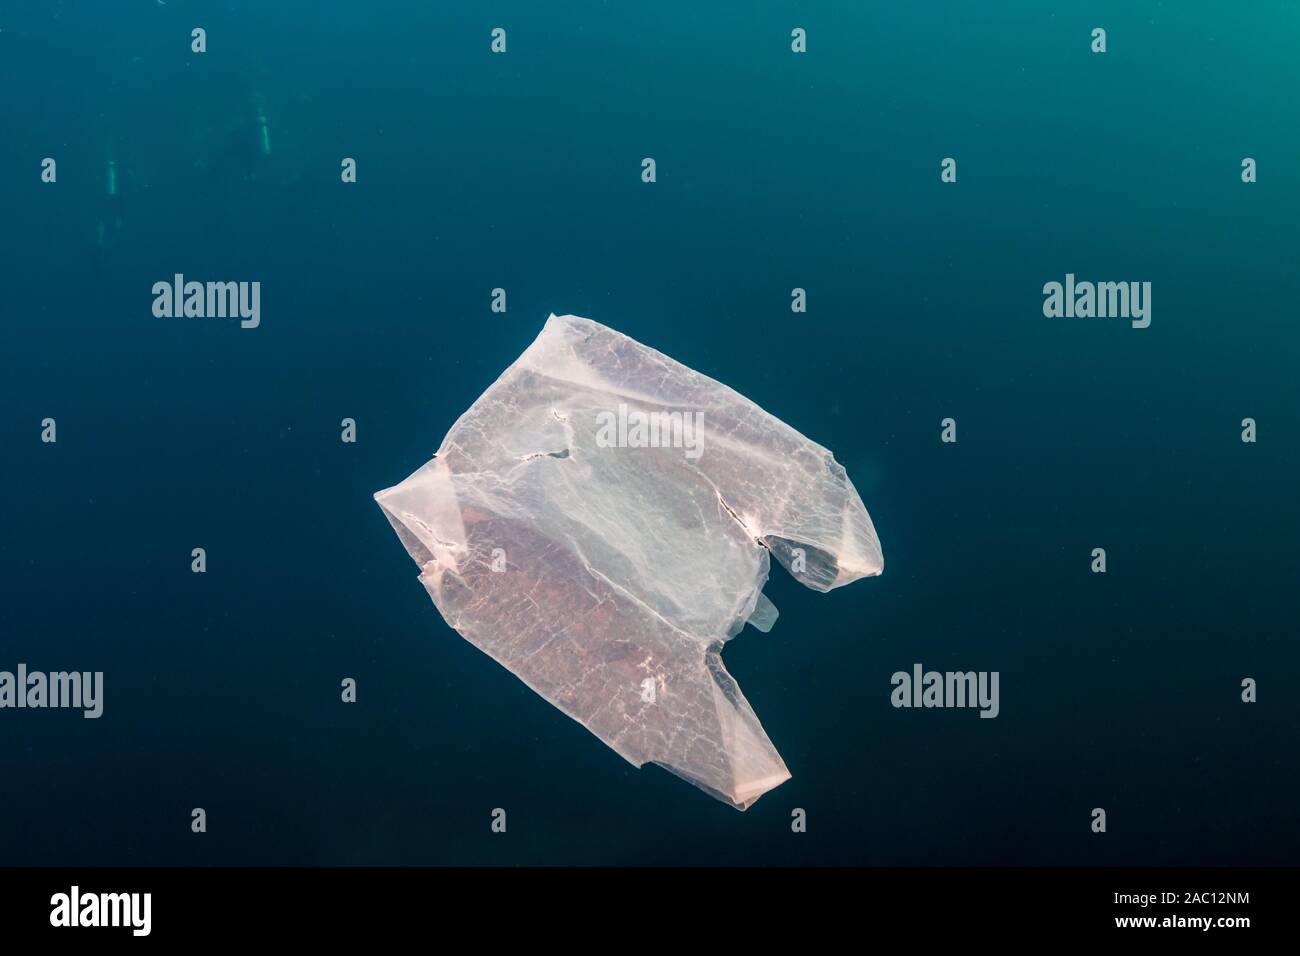 Plastic Pollution in the Ocean - A discarded plastic bag drifting underwater in a tropical ocean Stock Photo